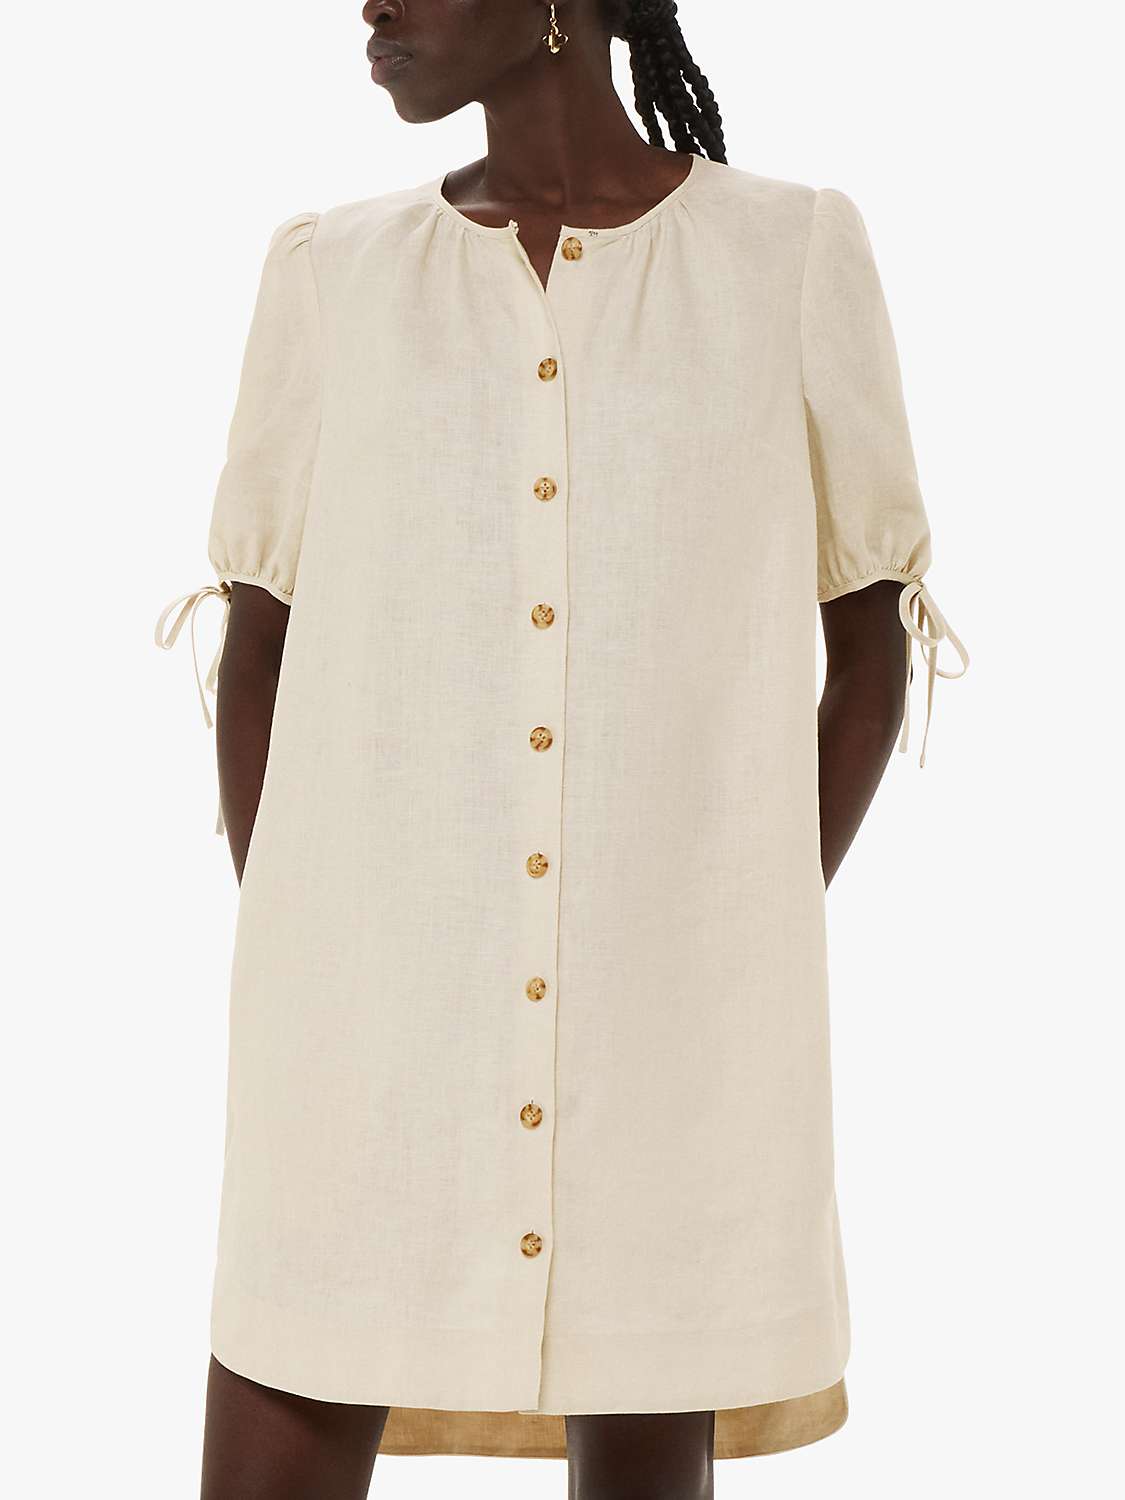 Buy Whistles Frankie Button Through Puff Sleeve Dress Online at johnlewis.com